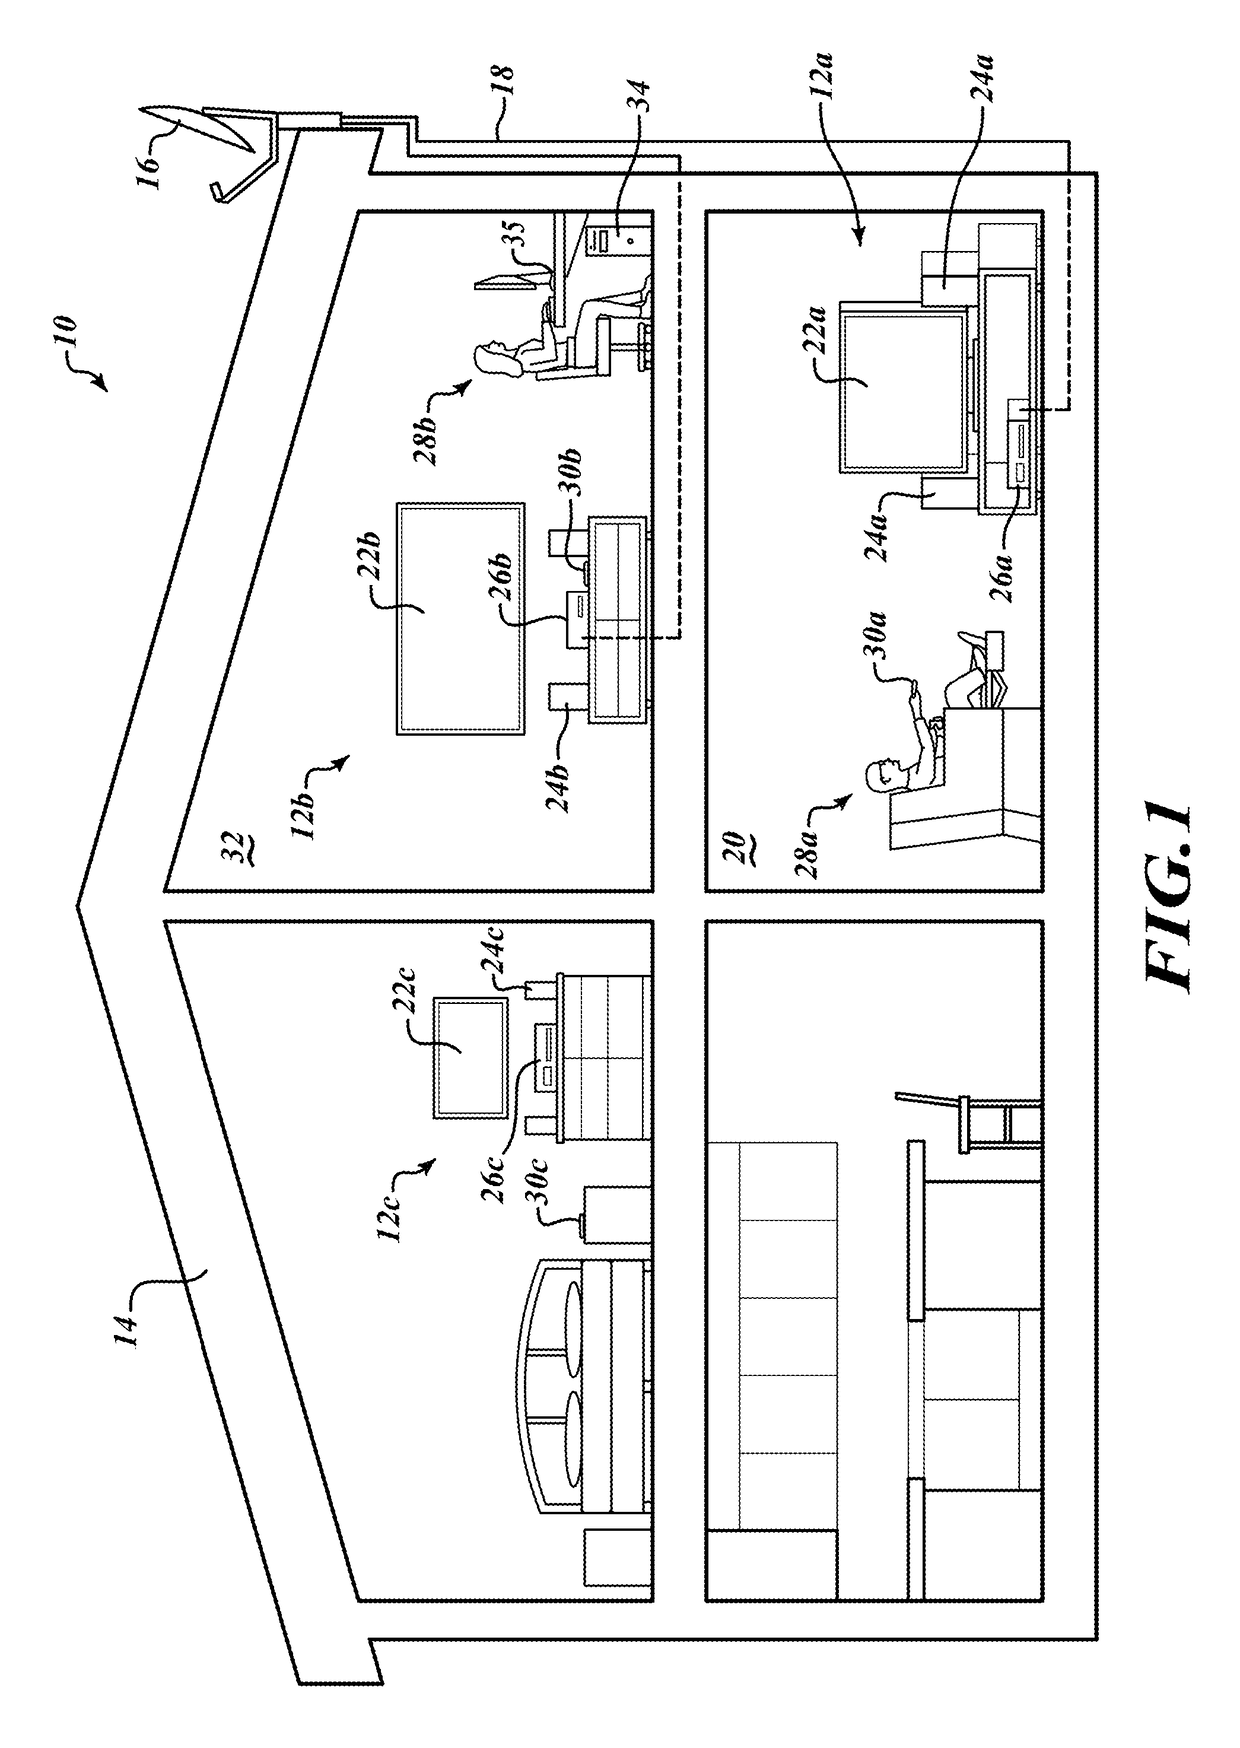 Remote control with microphone used for pairing the remote control to a system and method of using the same